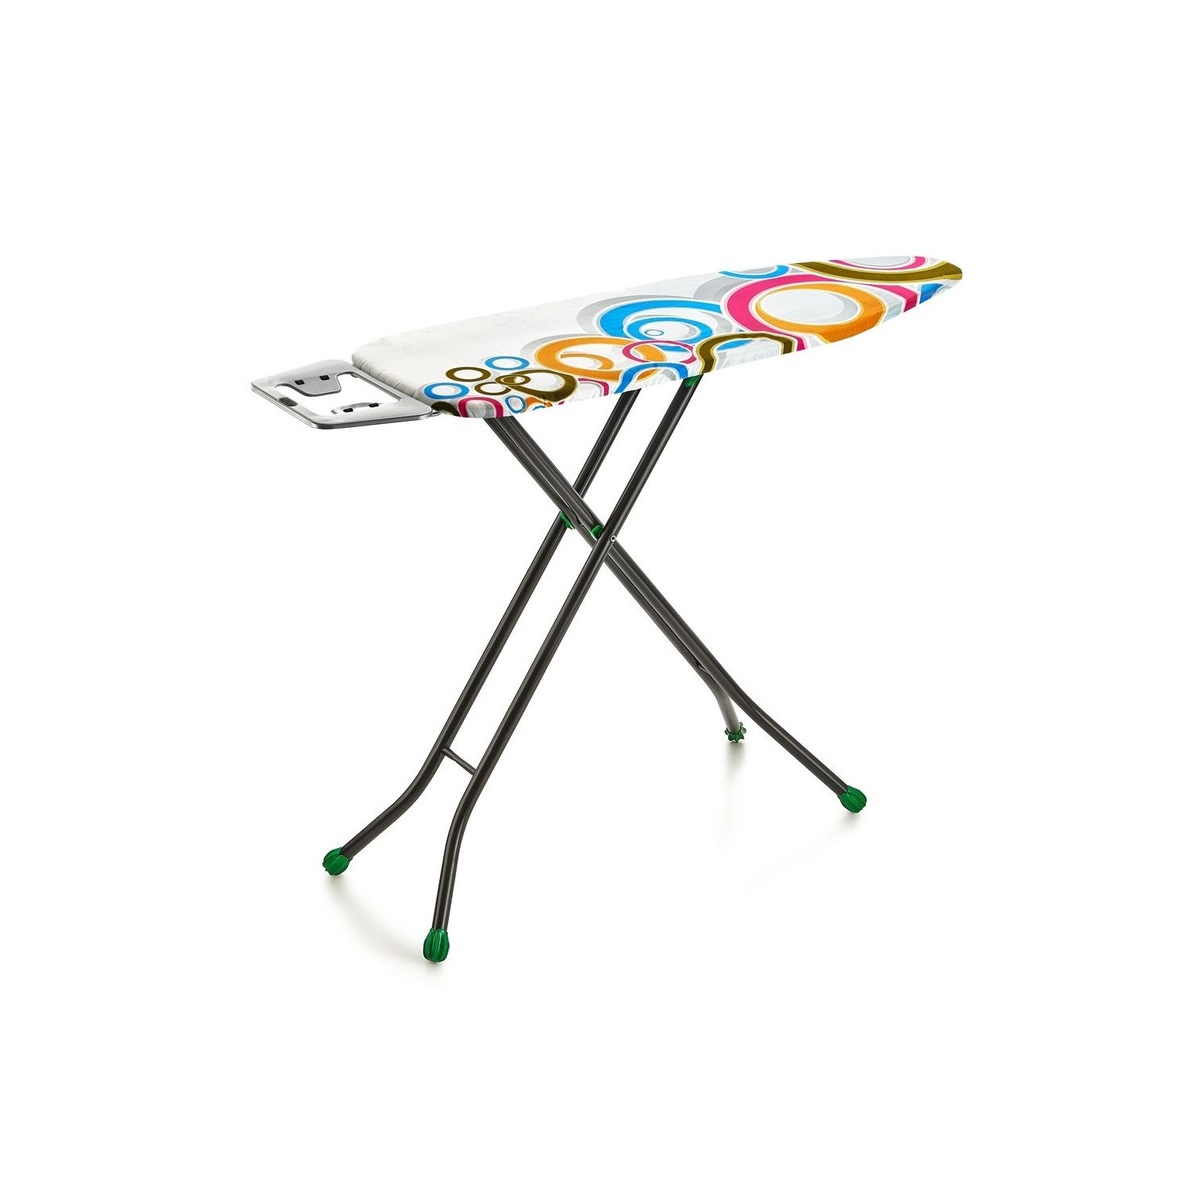 Dogrular Ironing Board 15022 Assorted Color